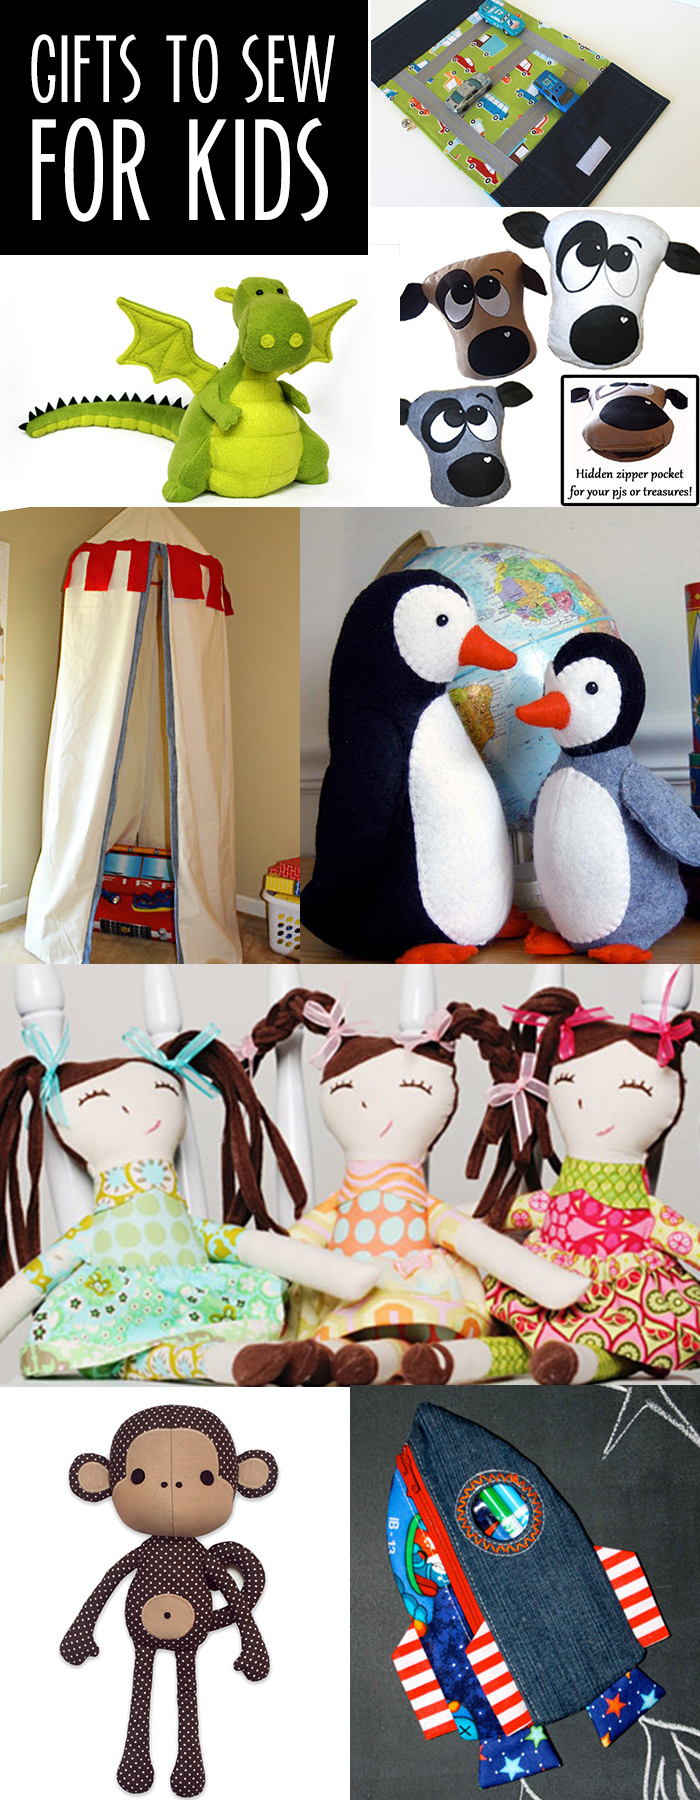 Gifts to sew for kids!